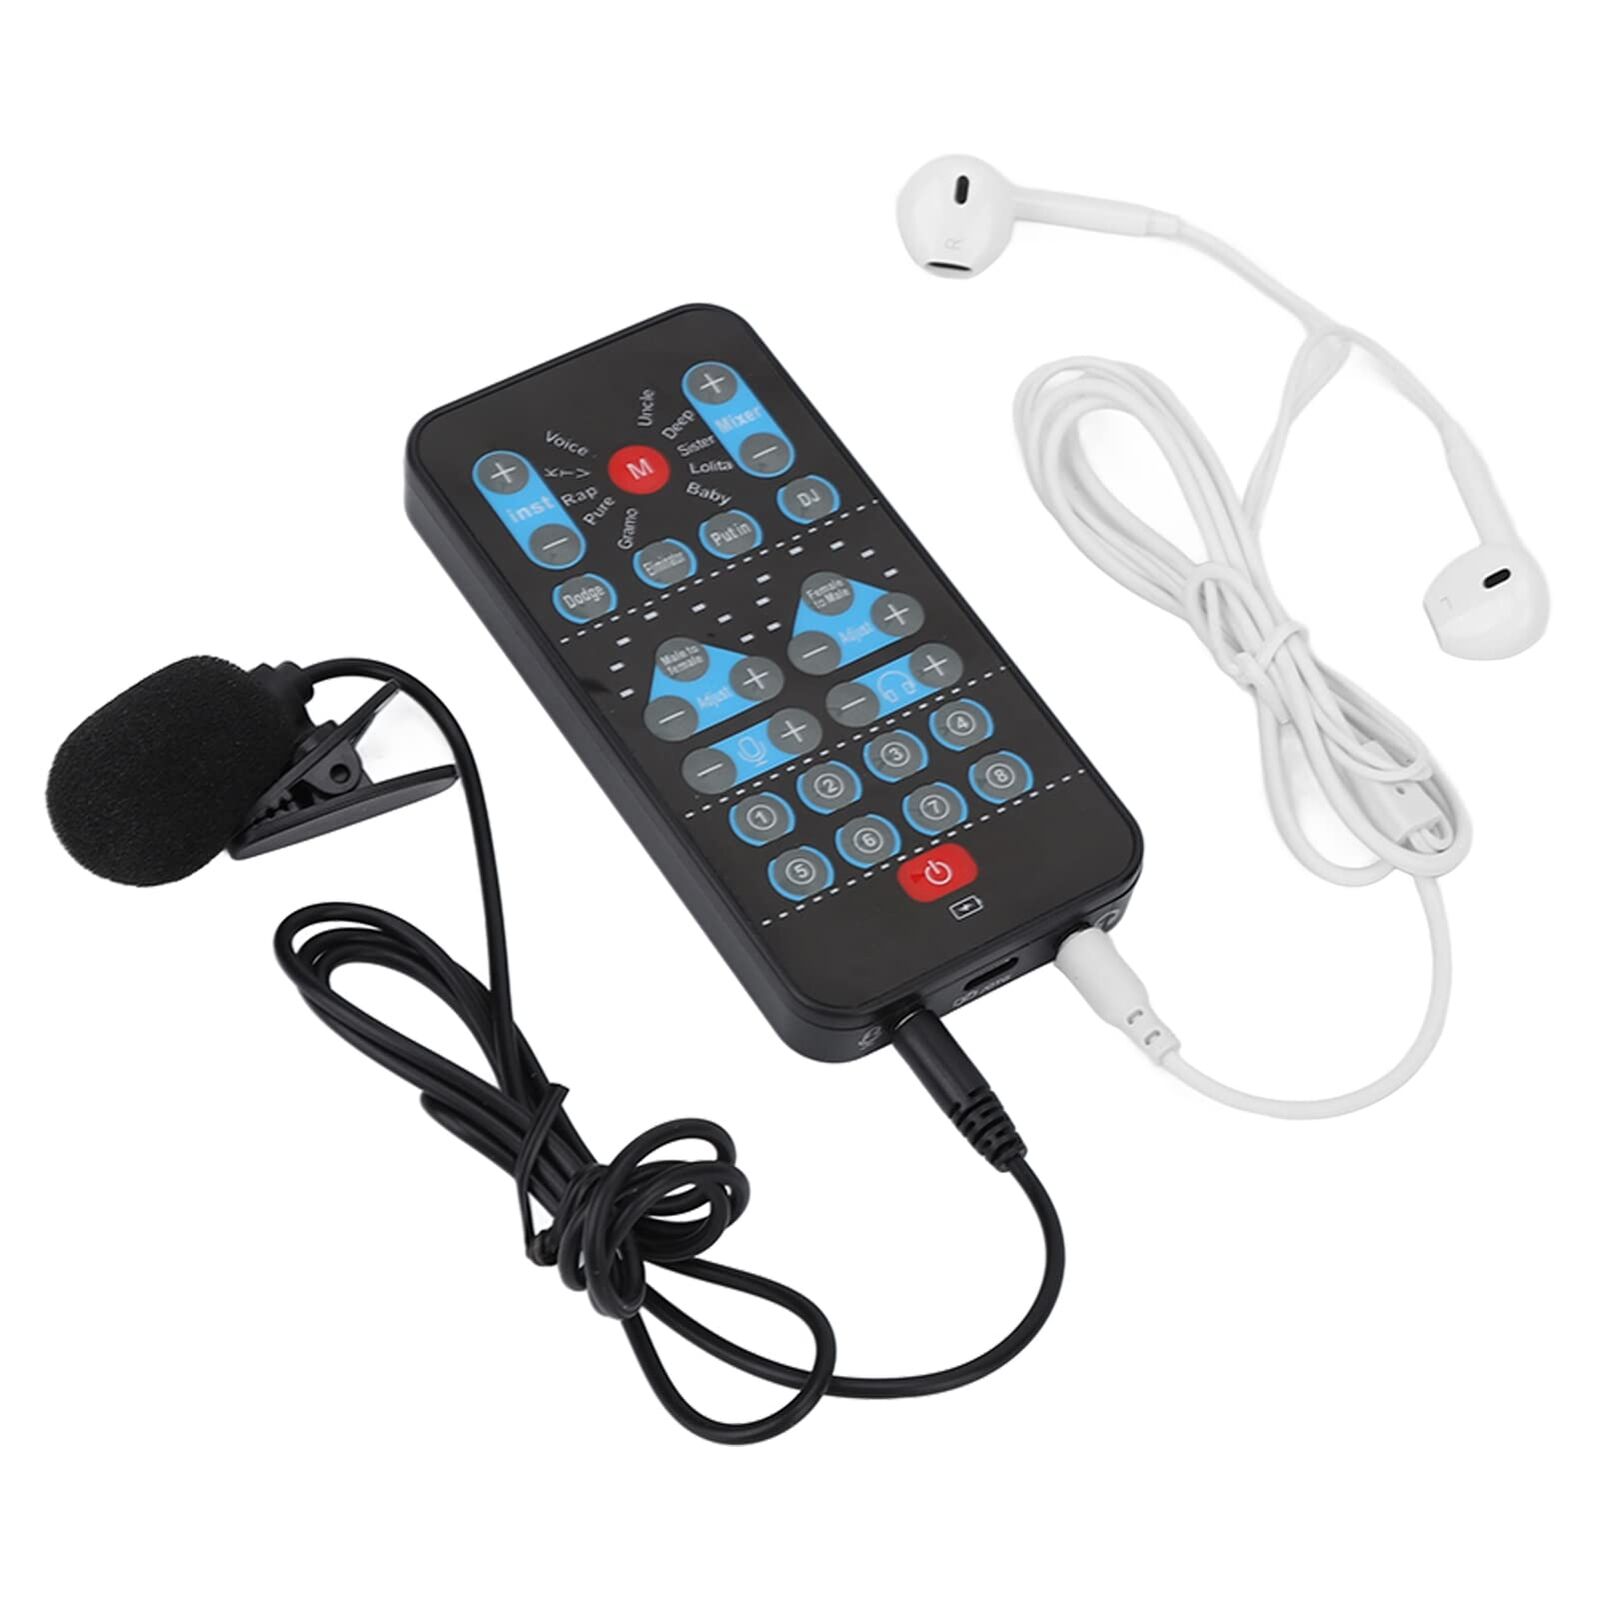 Portable Live Sound Card,8 Sound Effects External Mini Voice Changer,Support Mul